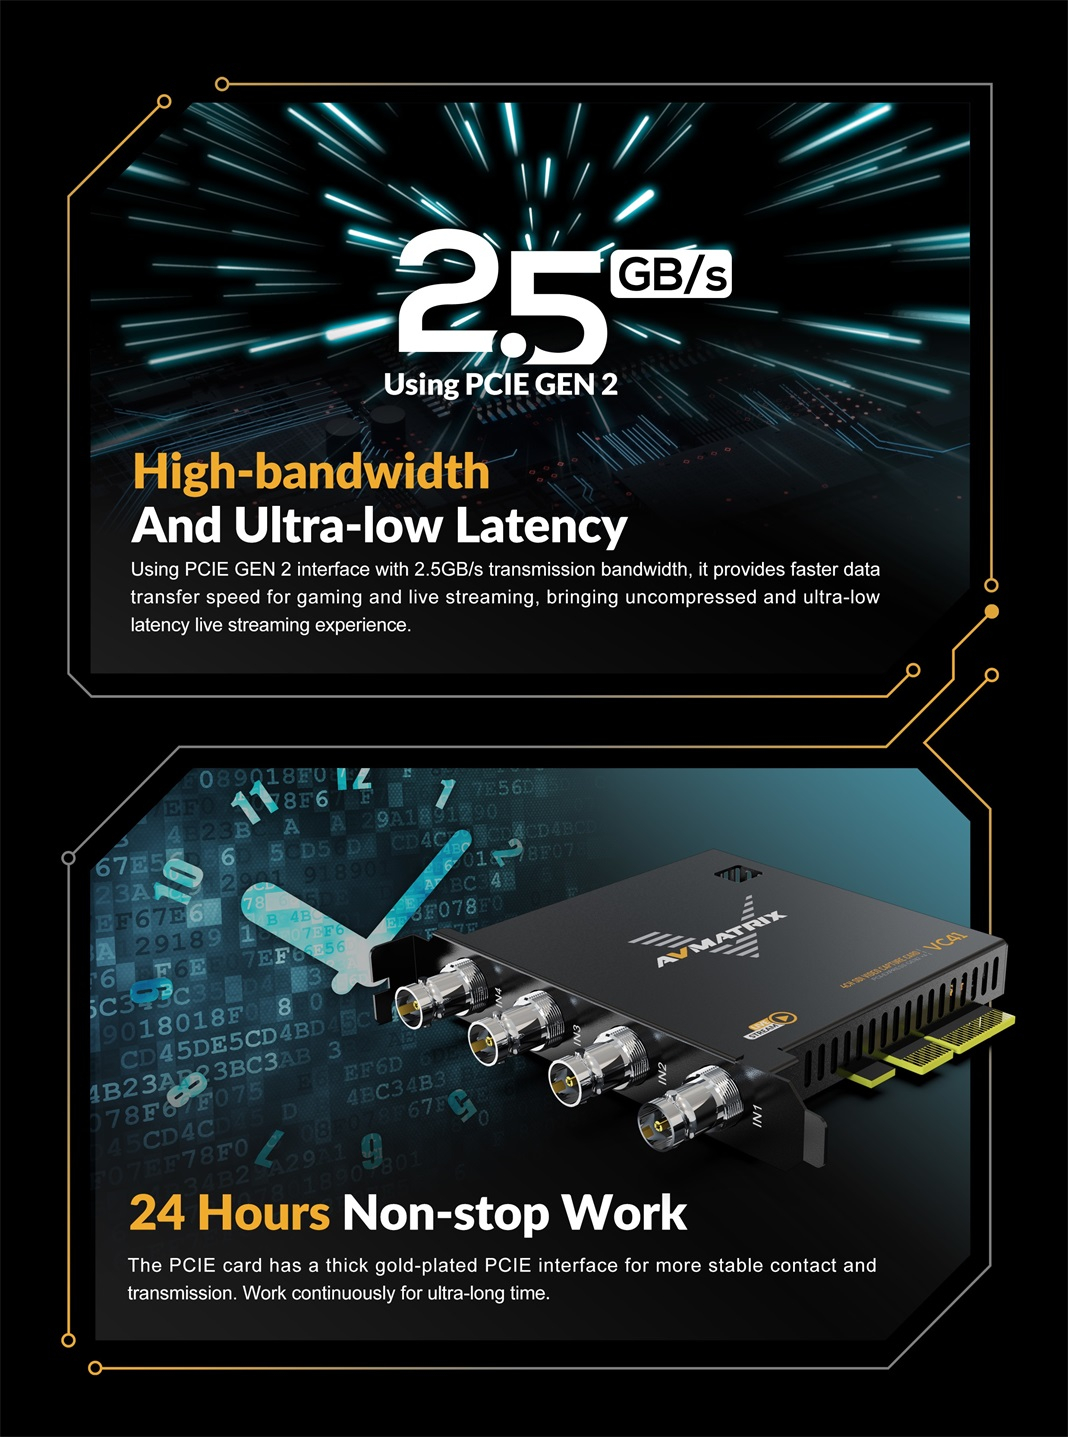 High-bandwidth and Ultra-low Latency